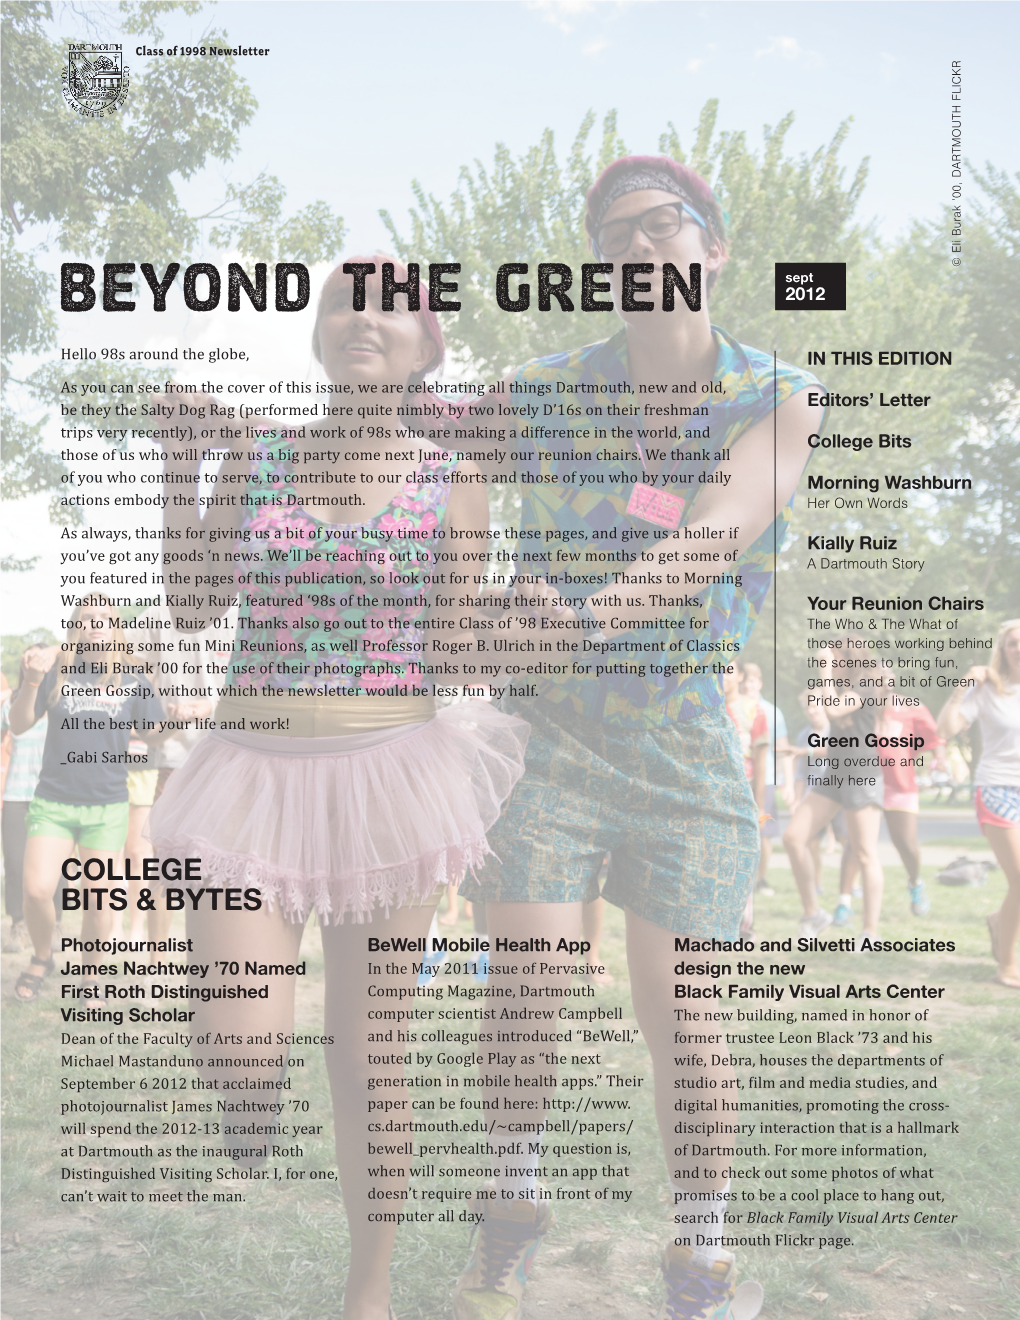 Beyond the Green